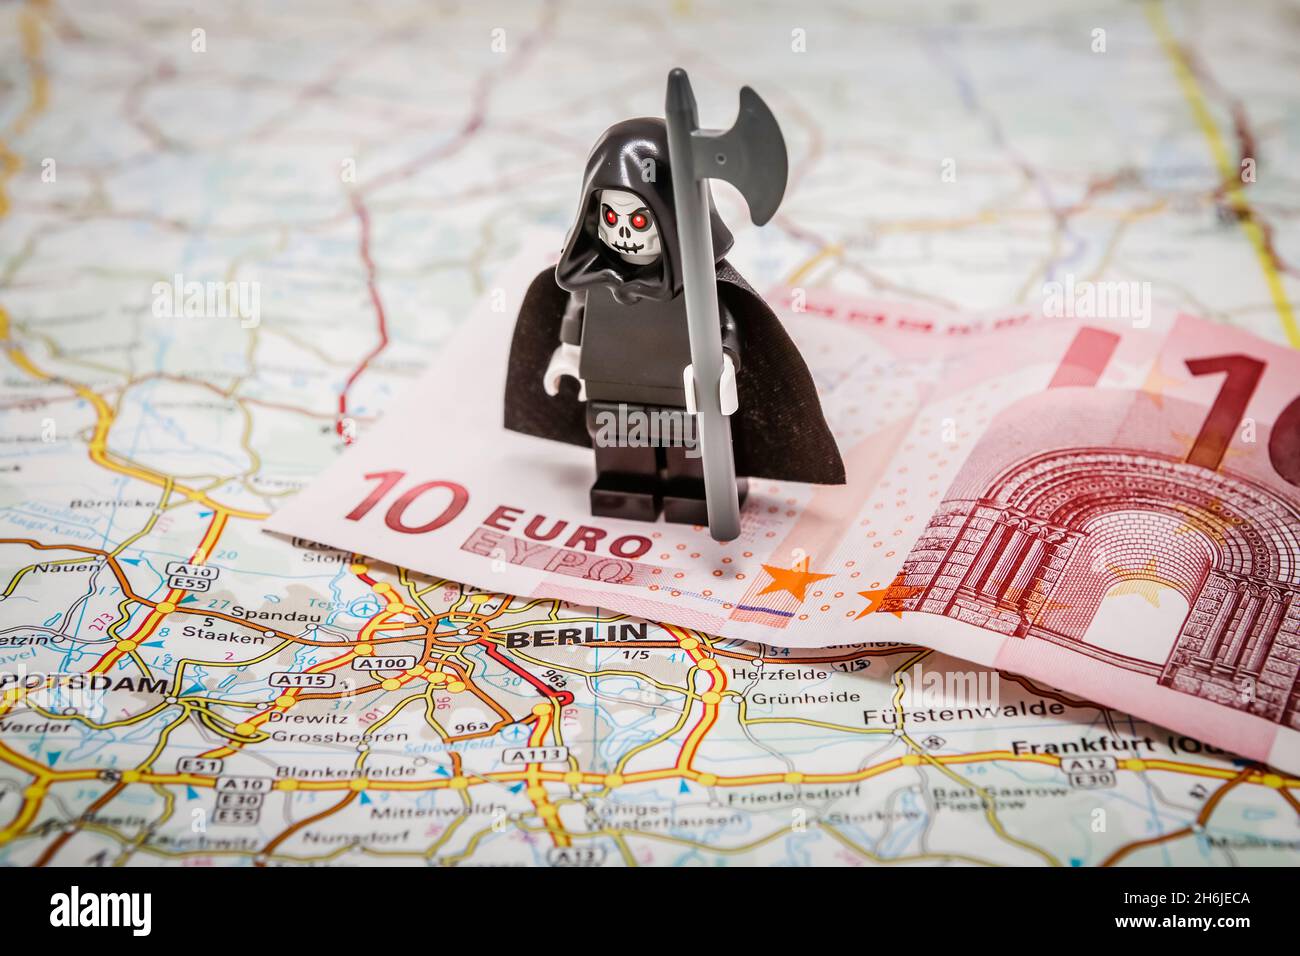 Death of the Euro - The grim reaper standing on a 10 Euro note on top of a map of Europe Stock Photo